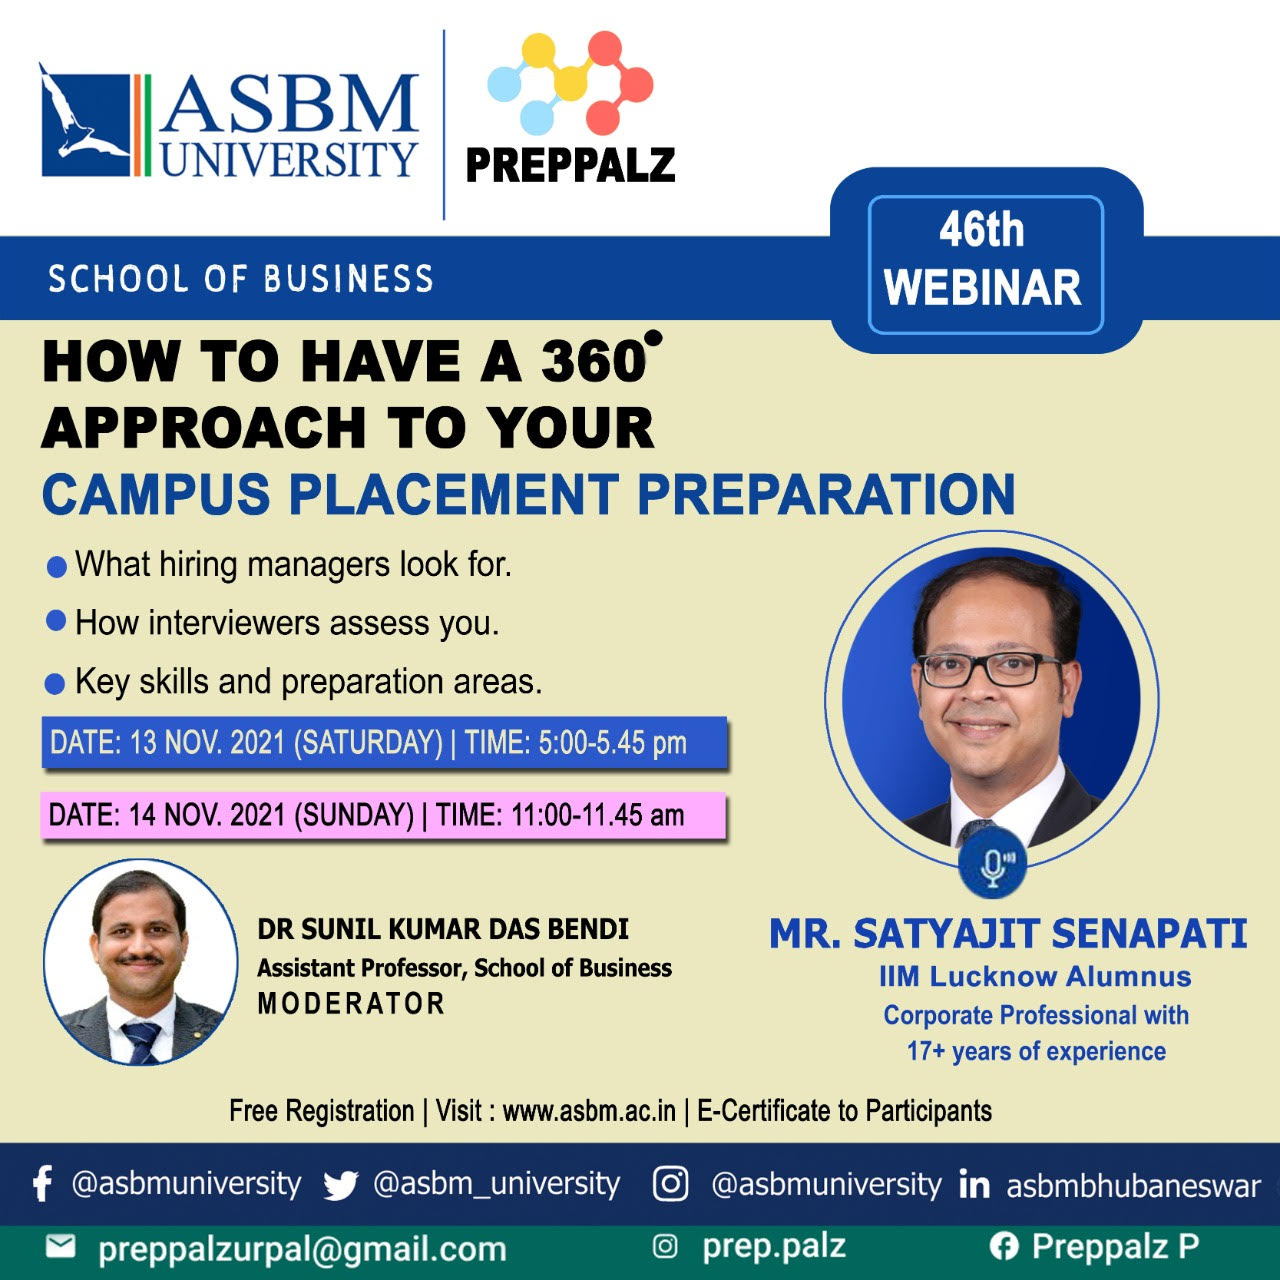 46th webinar Jointly organized by ASBM University and PREPPALZ on the topic  “How to have a 360 degree approach to your campus placement preparation”